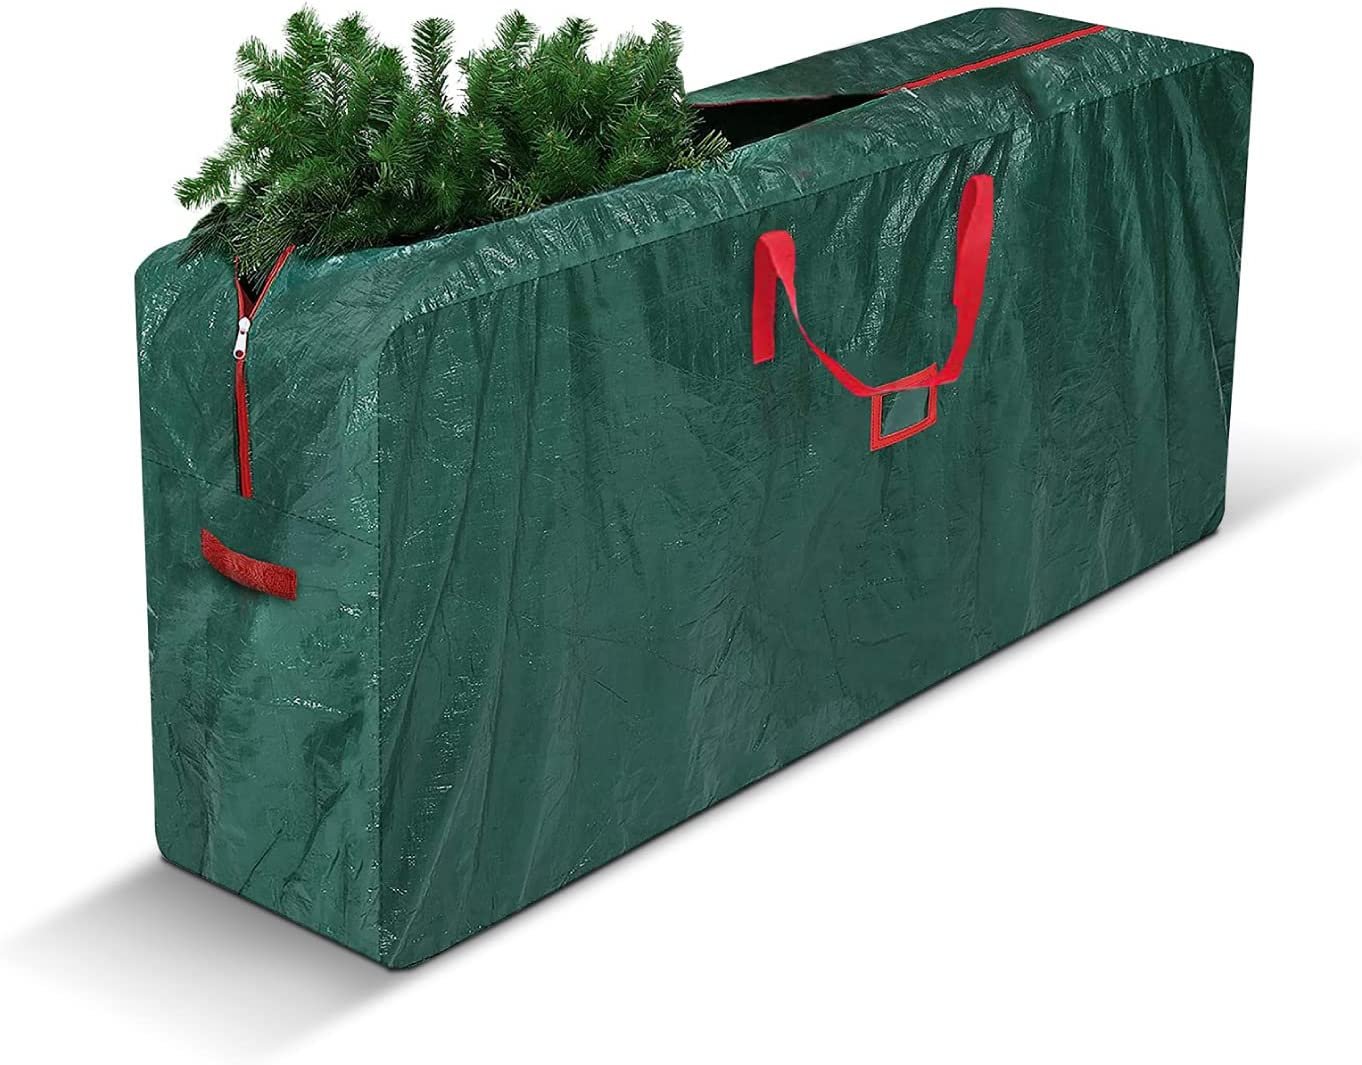 STERUN Waterproof Strong 2.4M Hight Christmas Tree Storage Bag With Double Zipper & Carry Handle Ideal For Artificial Tree | Christmas Tree Storage Bag | Christmas Tree Bag | Christmas Storage